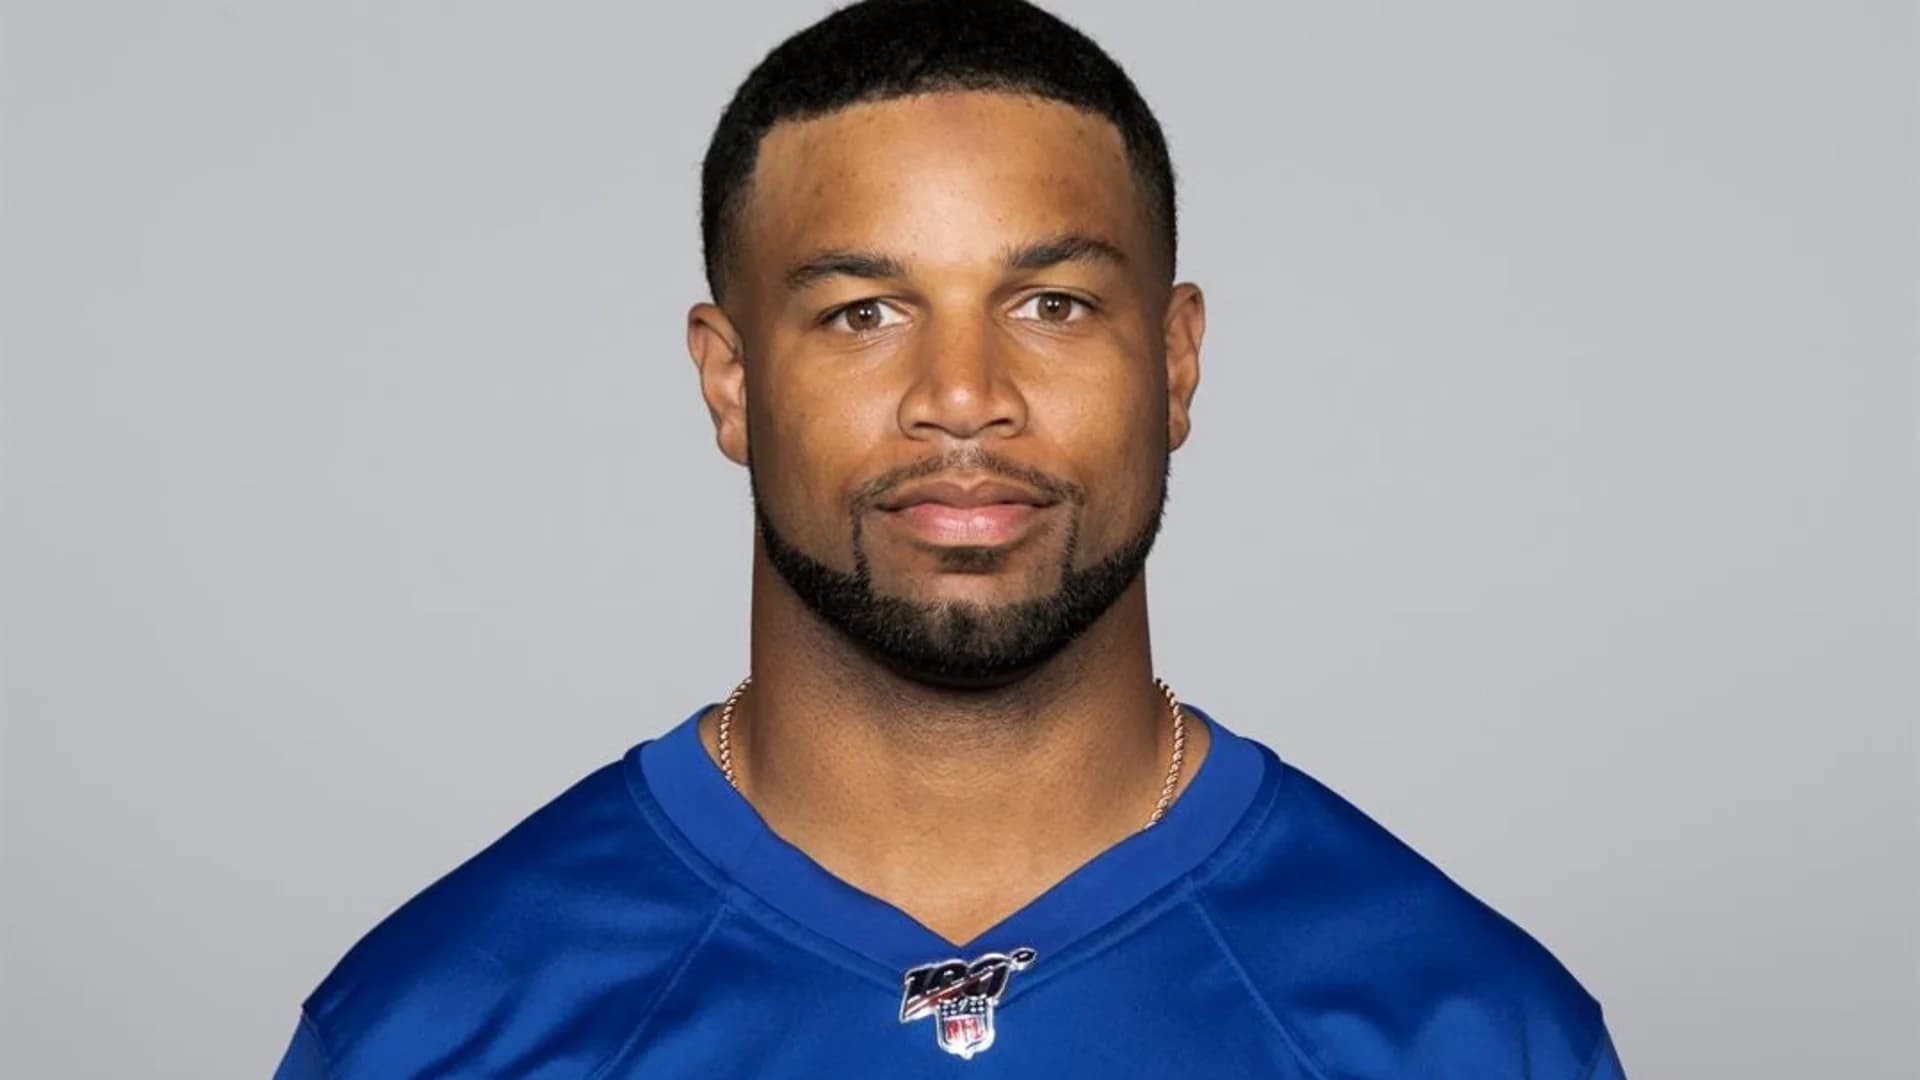 Giants WR Tate loses appeal; will be suspended fertility drug use